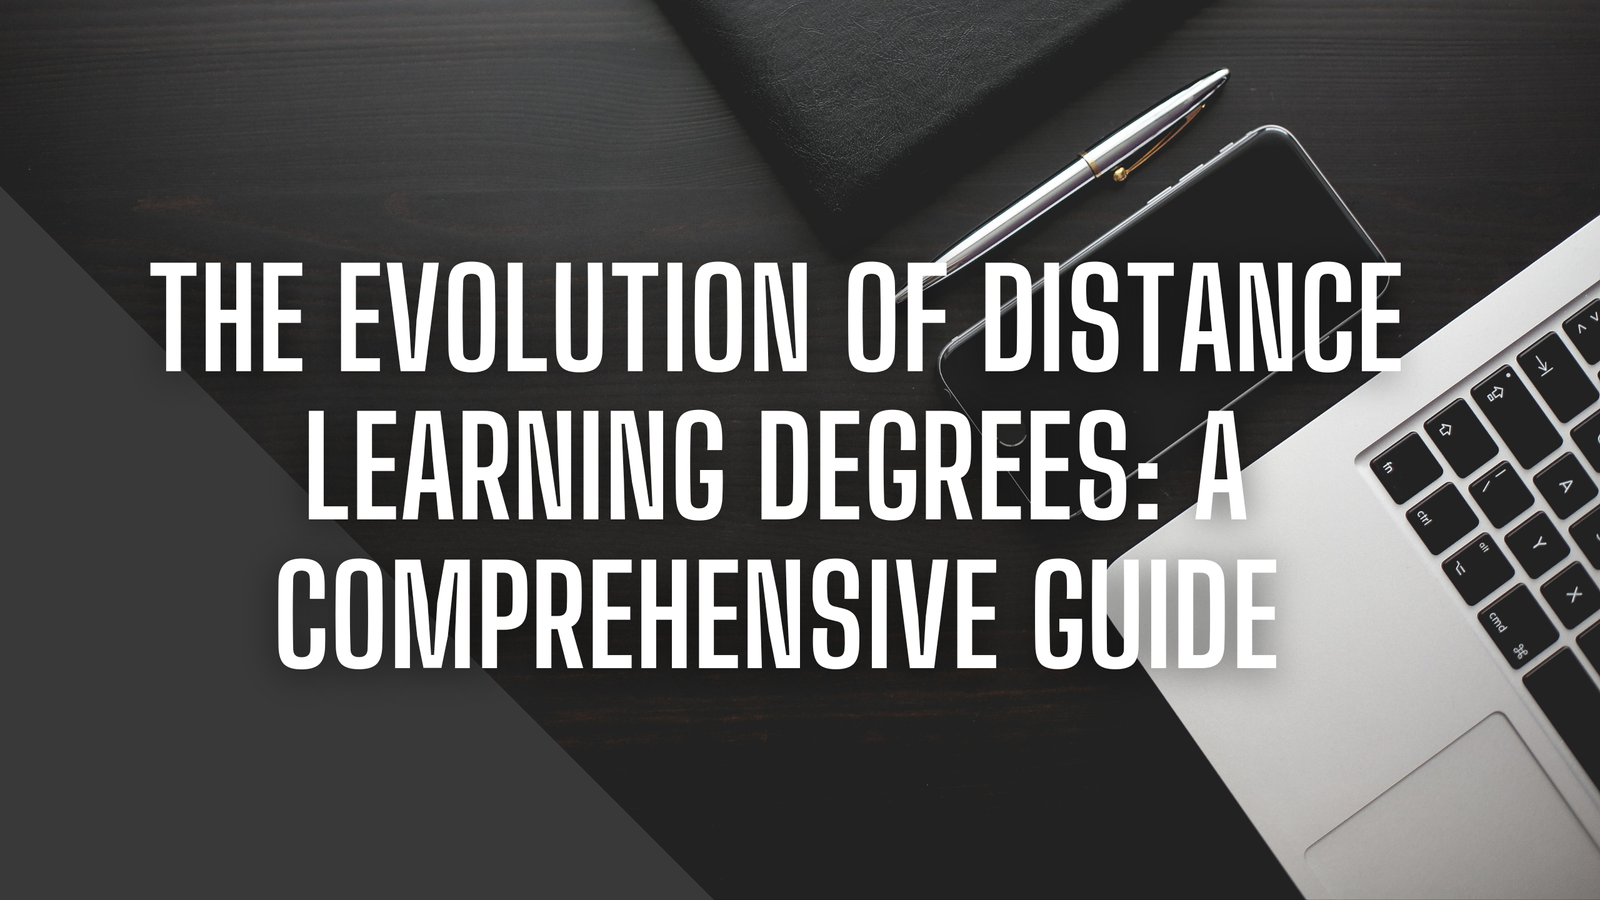 The Evolution of Distance Learning Degrees: A Comprehensive Guide